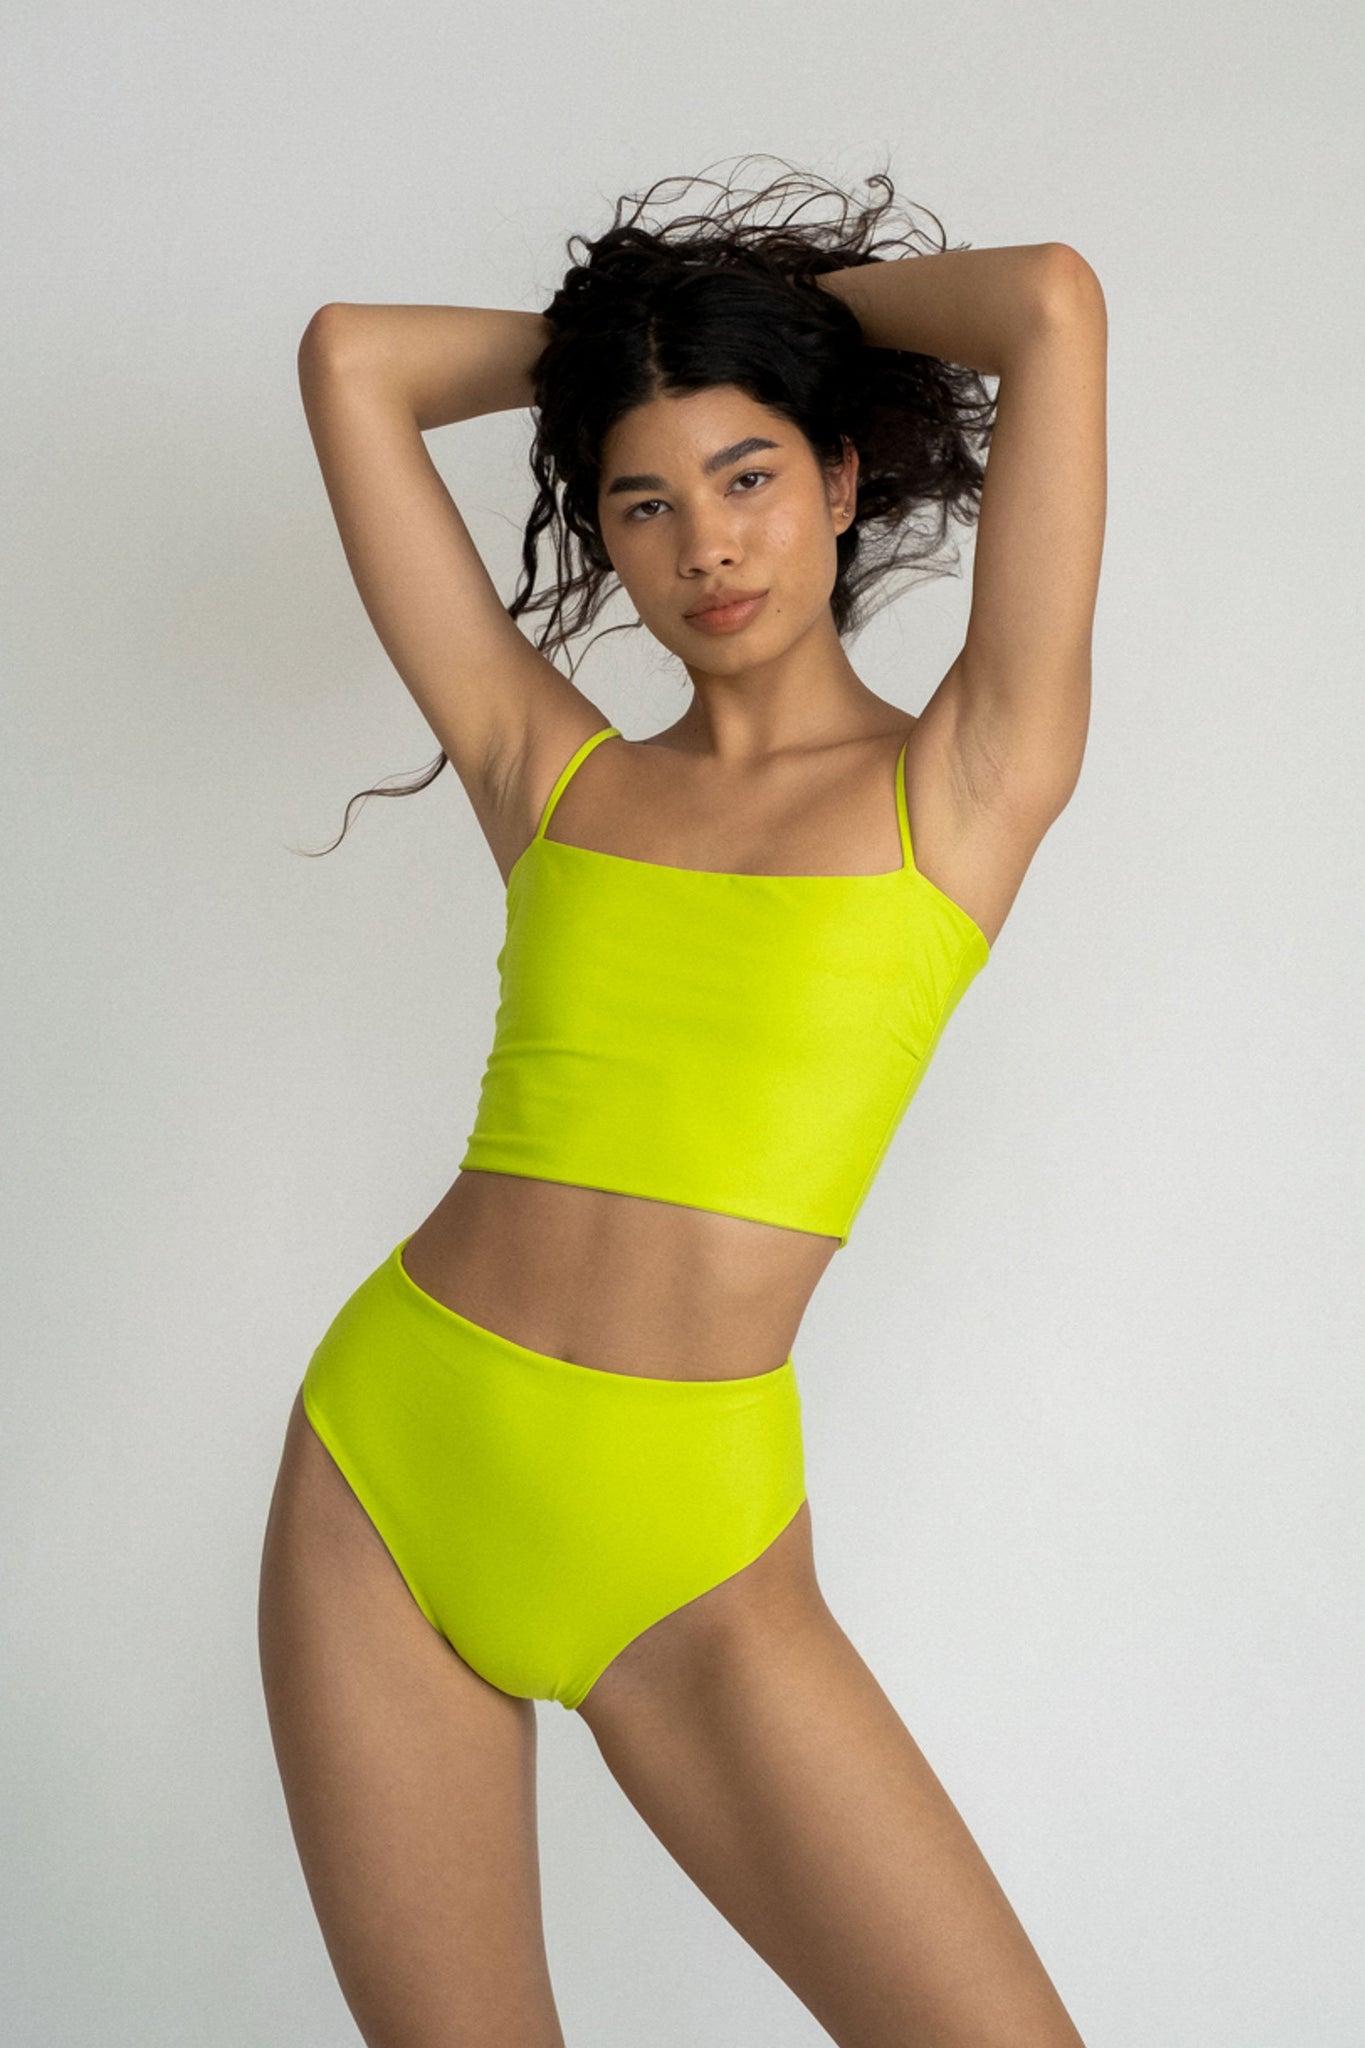 A woman standing with her hands in her hair wearing a bright neon green tankini top with matching bright neon green high waisted bikini bottoms.